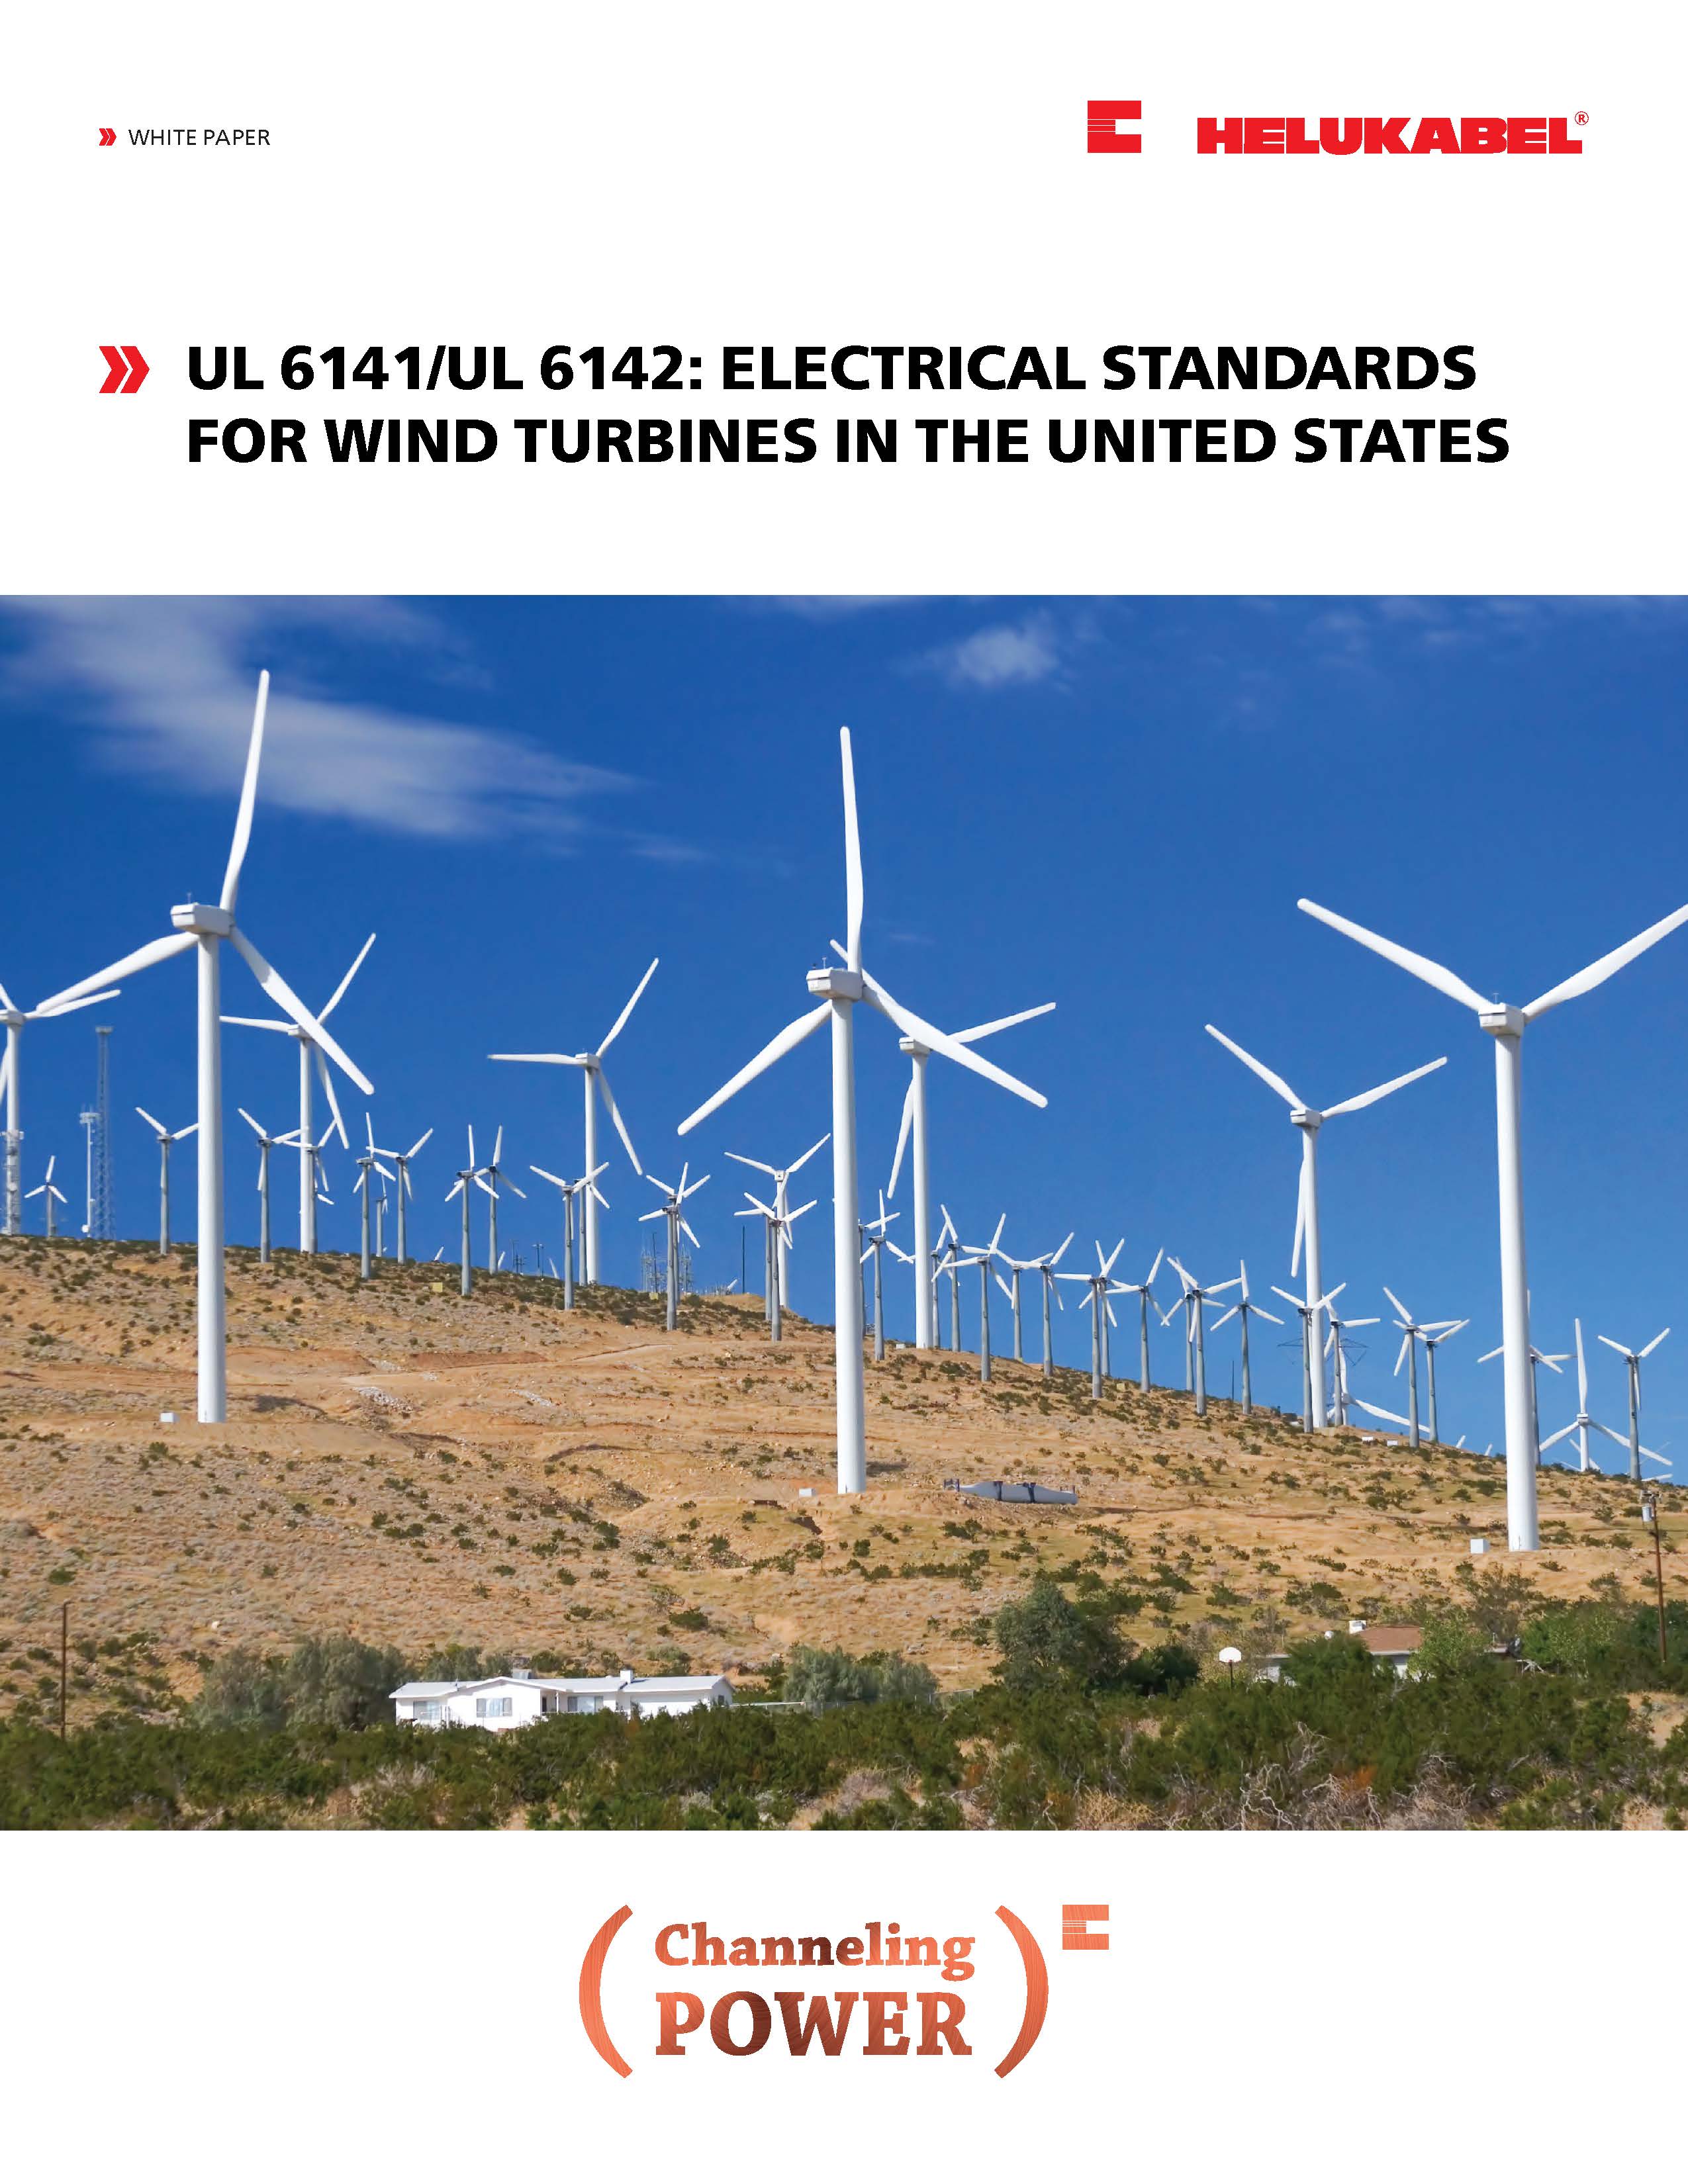 UL 6141/UL 6142: Electrical Standards for Wind Turbines in the United States